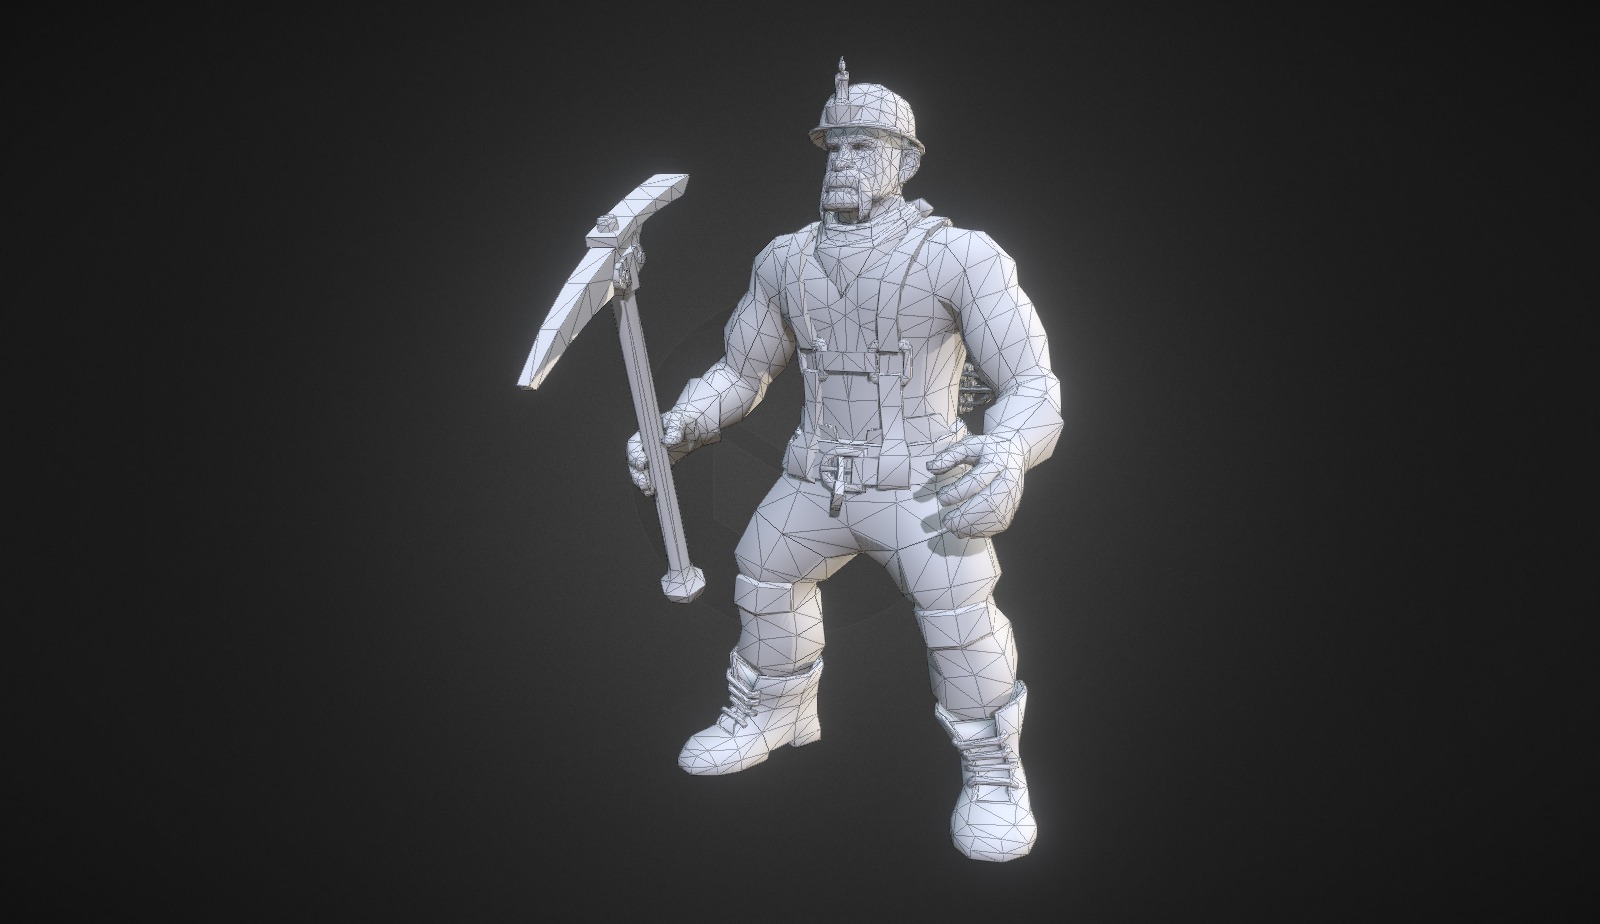 Self imposed task: Design and Model a Hero for the
hypothetical inclusion into the game Dota 2 3d model